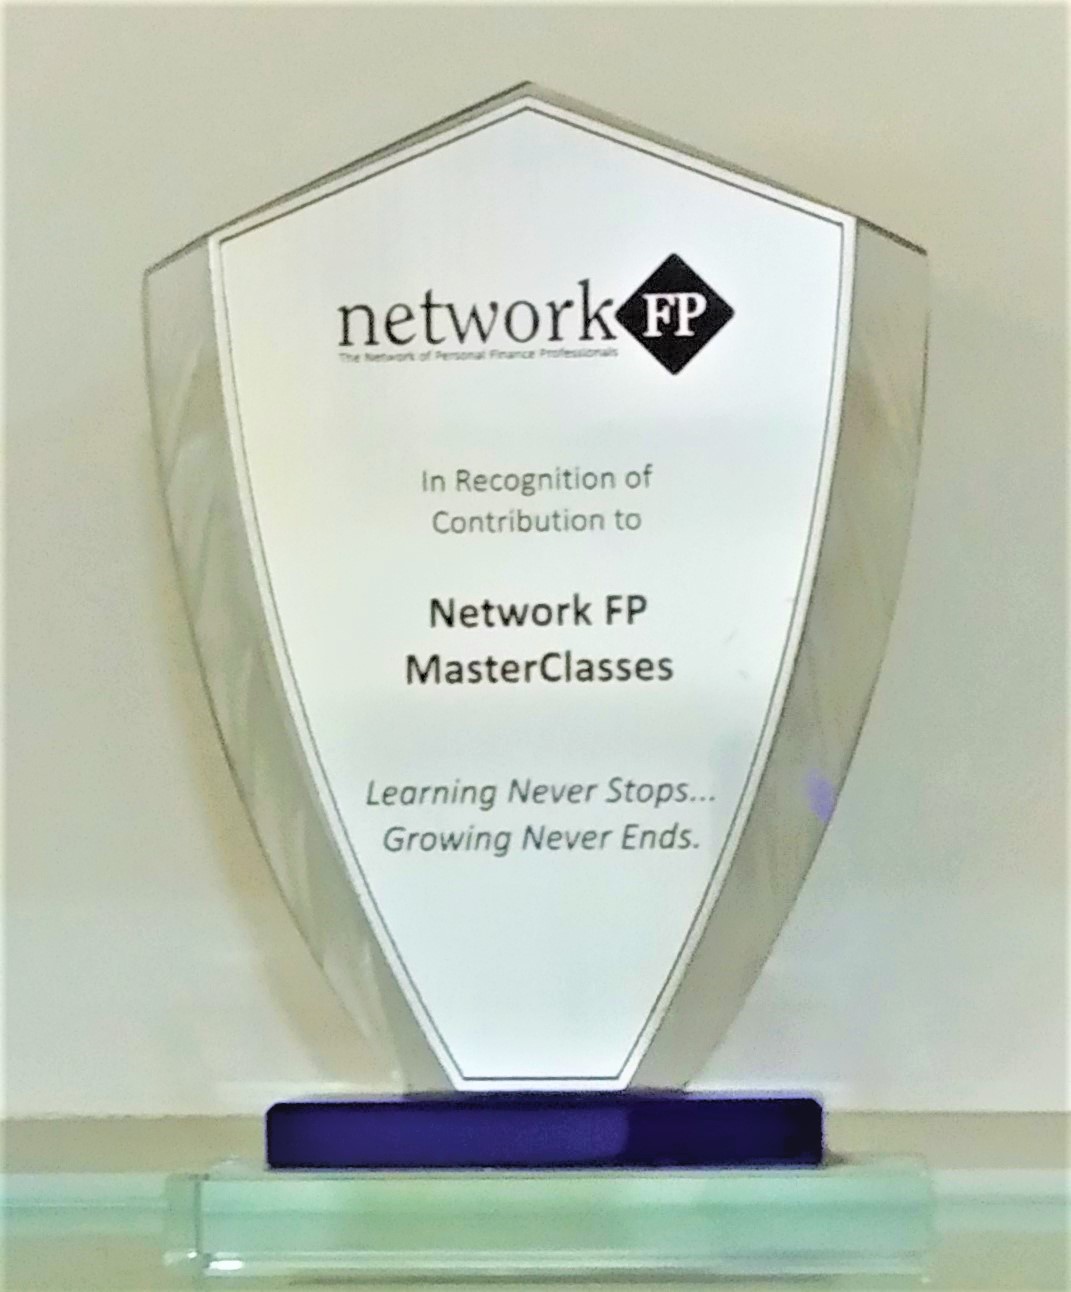 Achieved Recognition from networkFP Master classes